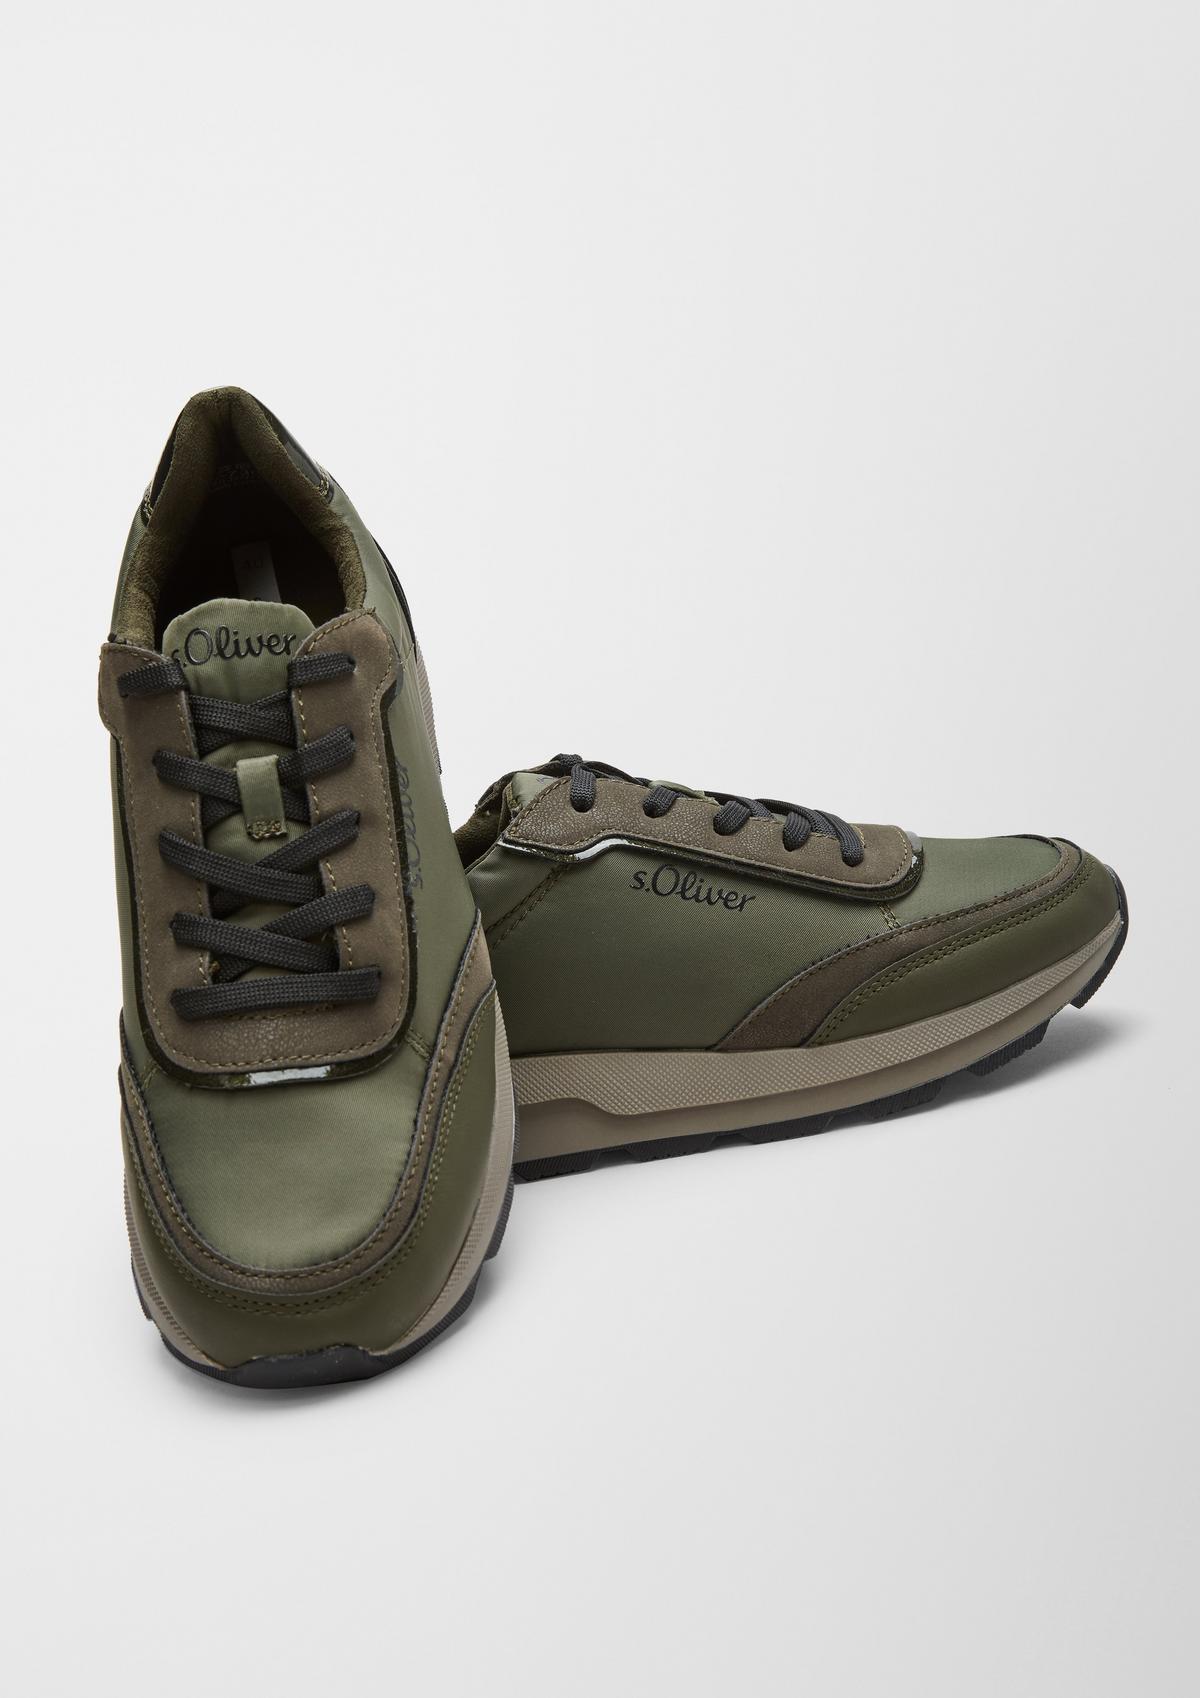 s.Oliver Sneaker im Materialmix